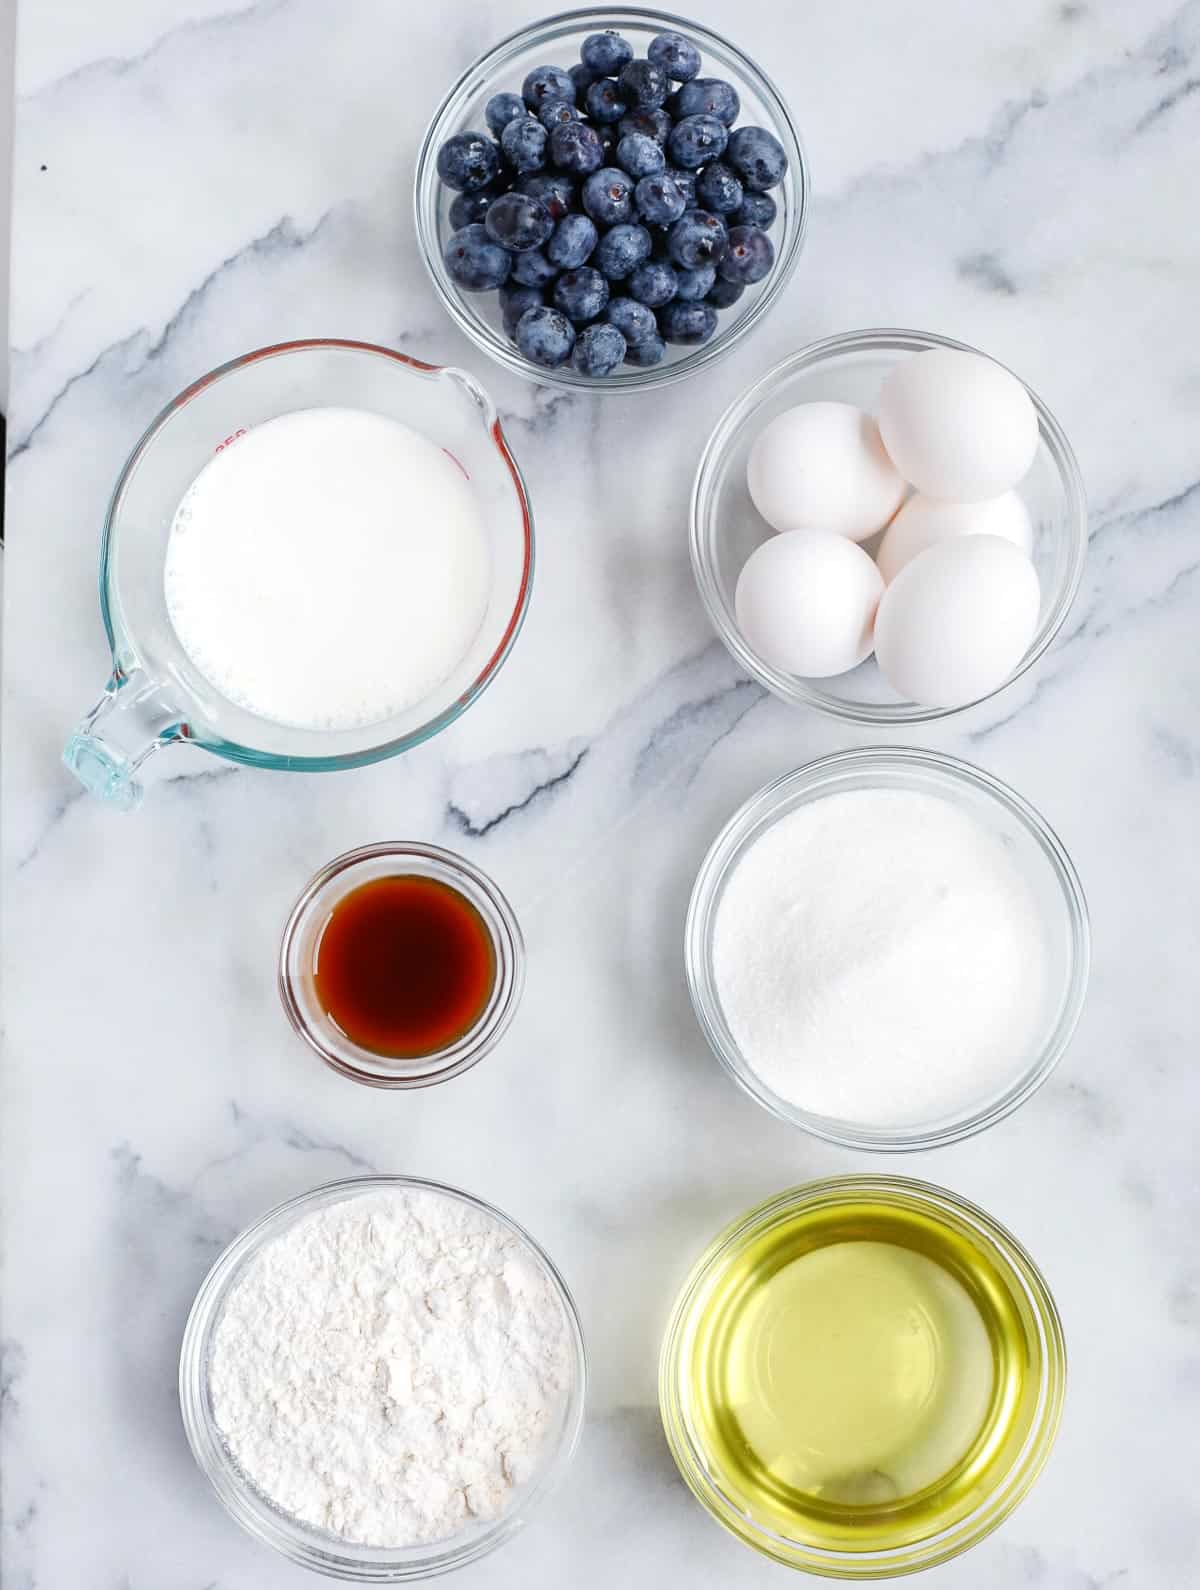 ingredients of the blueberry cake.